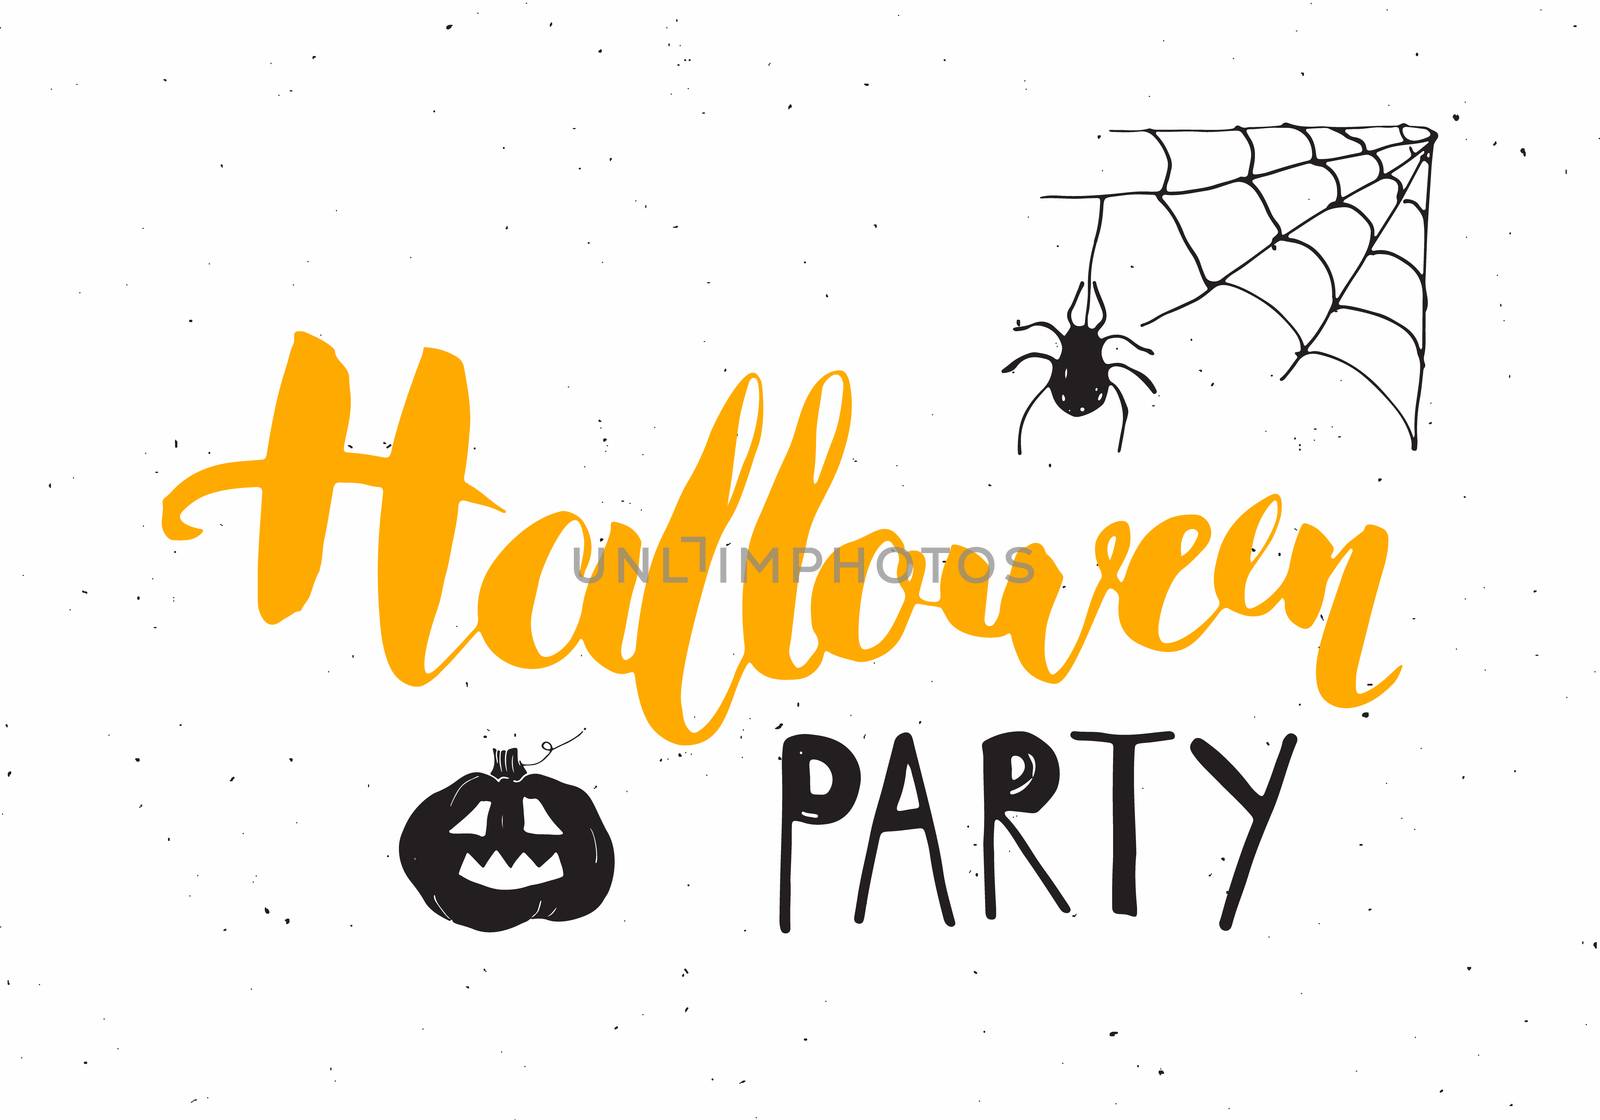 Halloween greeting card. Lettering calligraphy sign and hand drawn elements, party invitation or holiday banner design vector illustration.